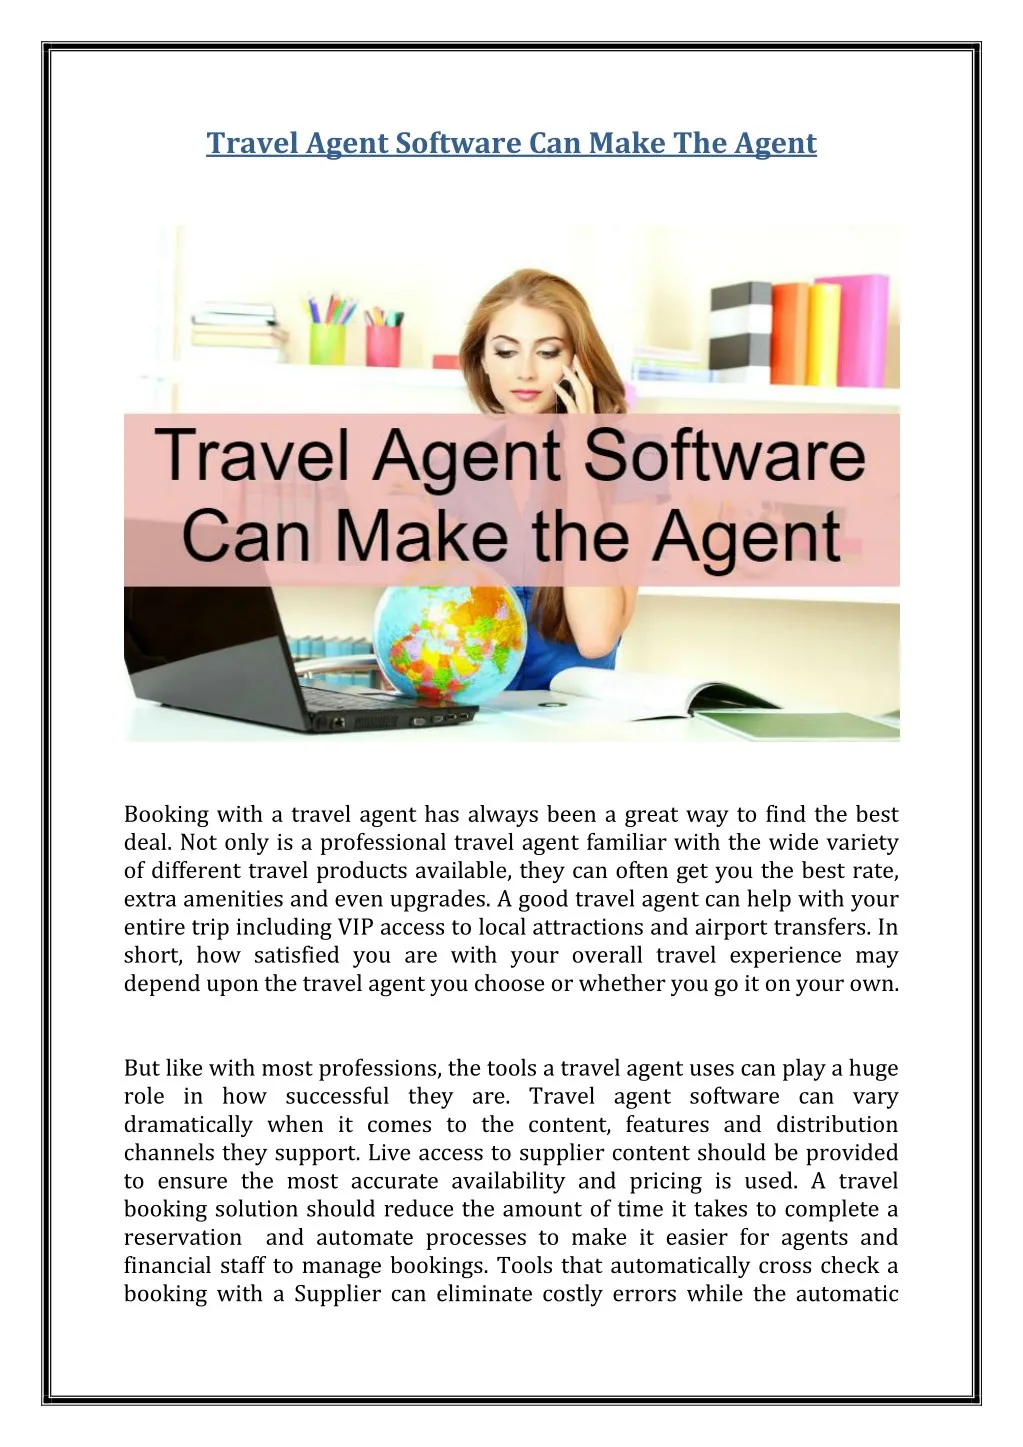 travel agent software can make the agent